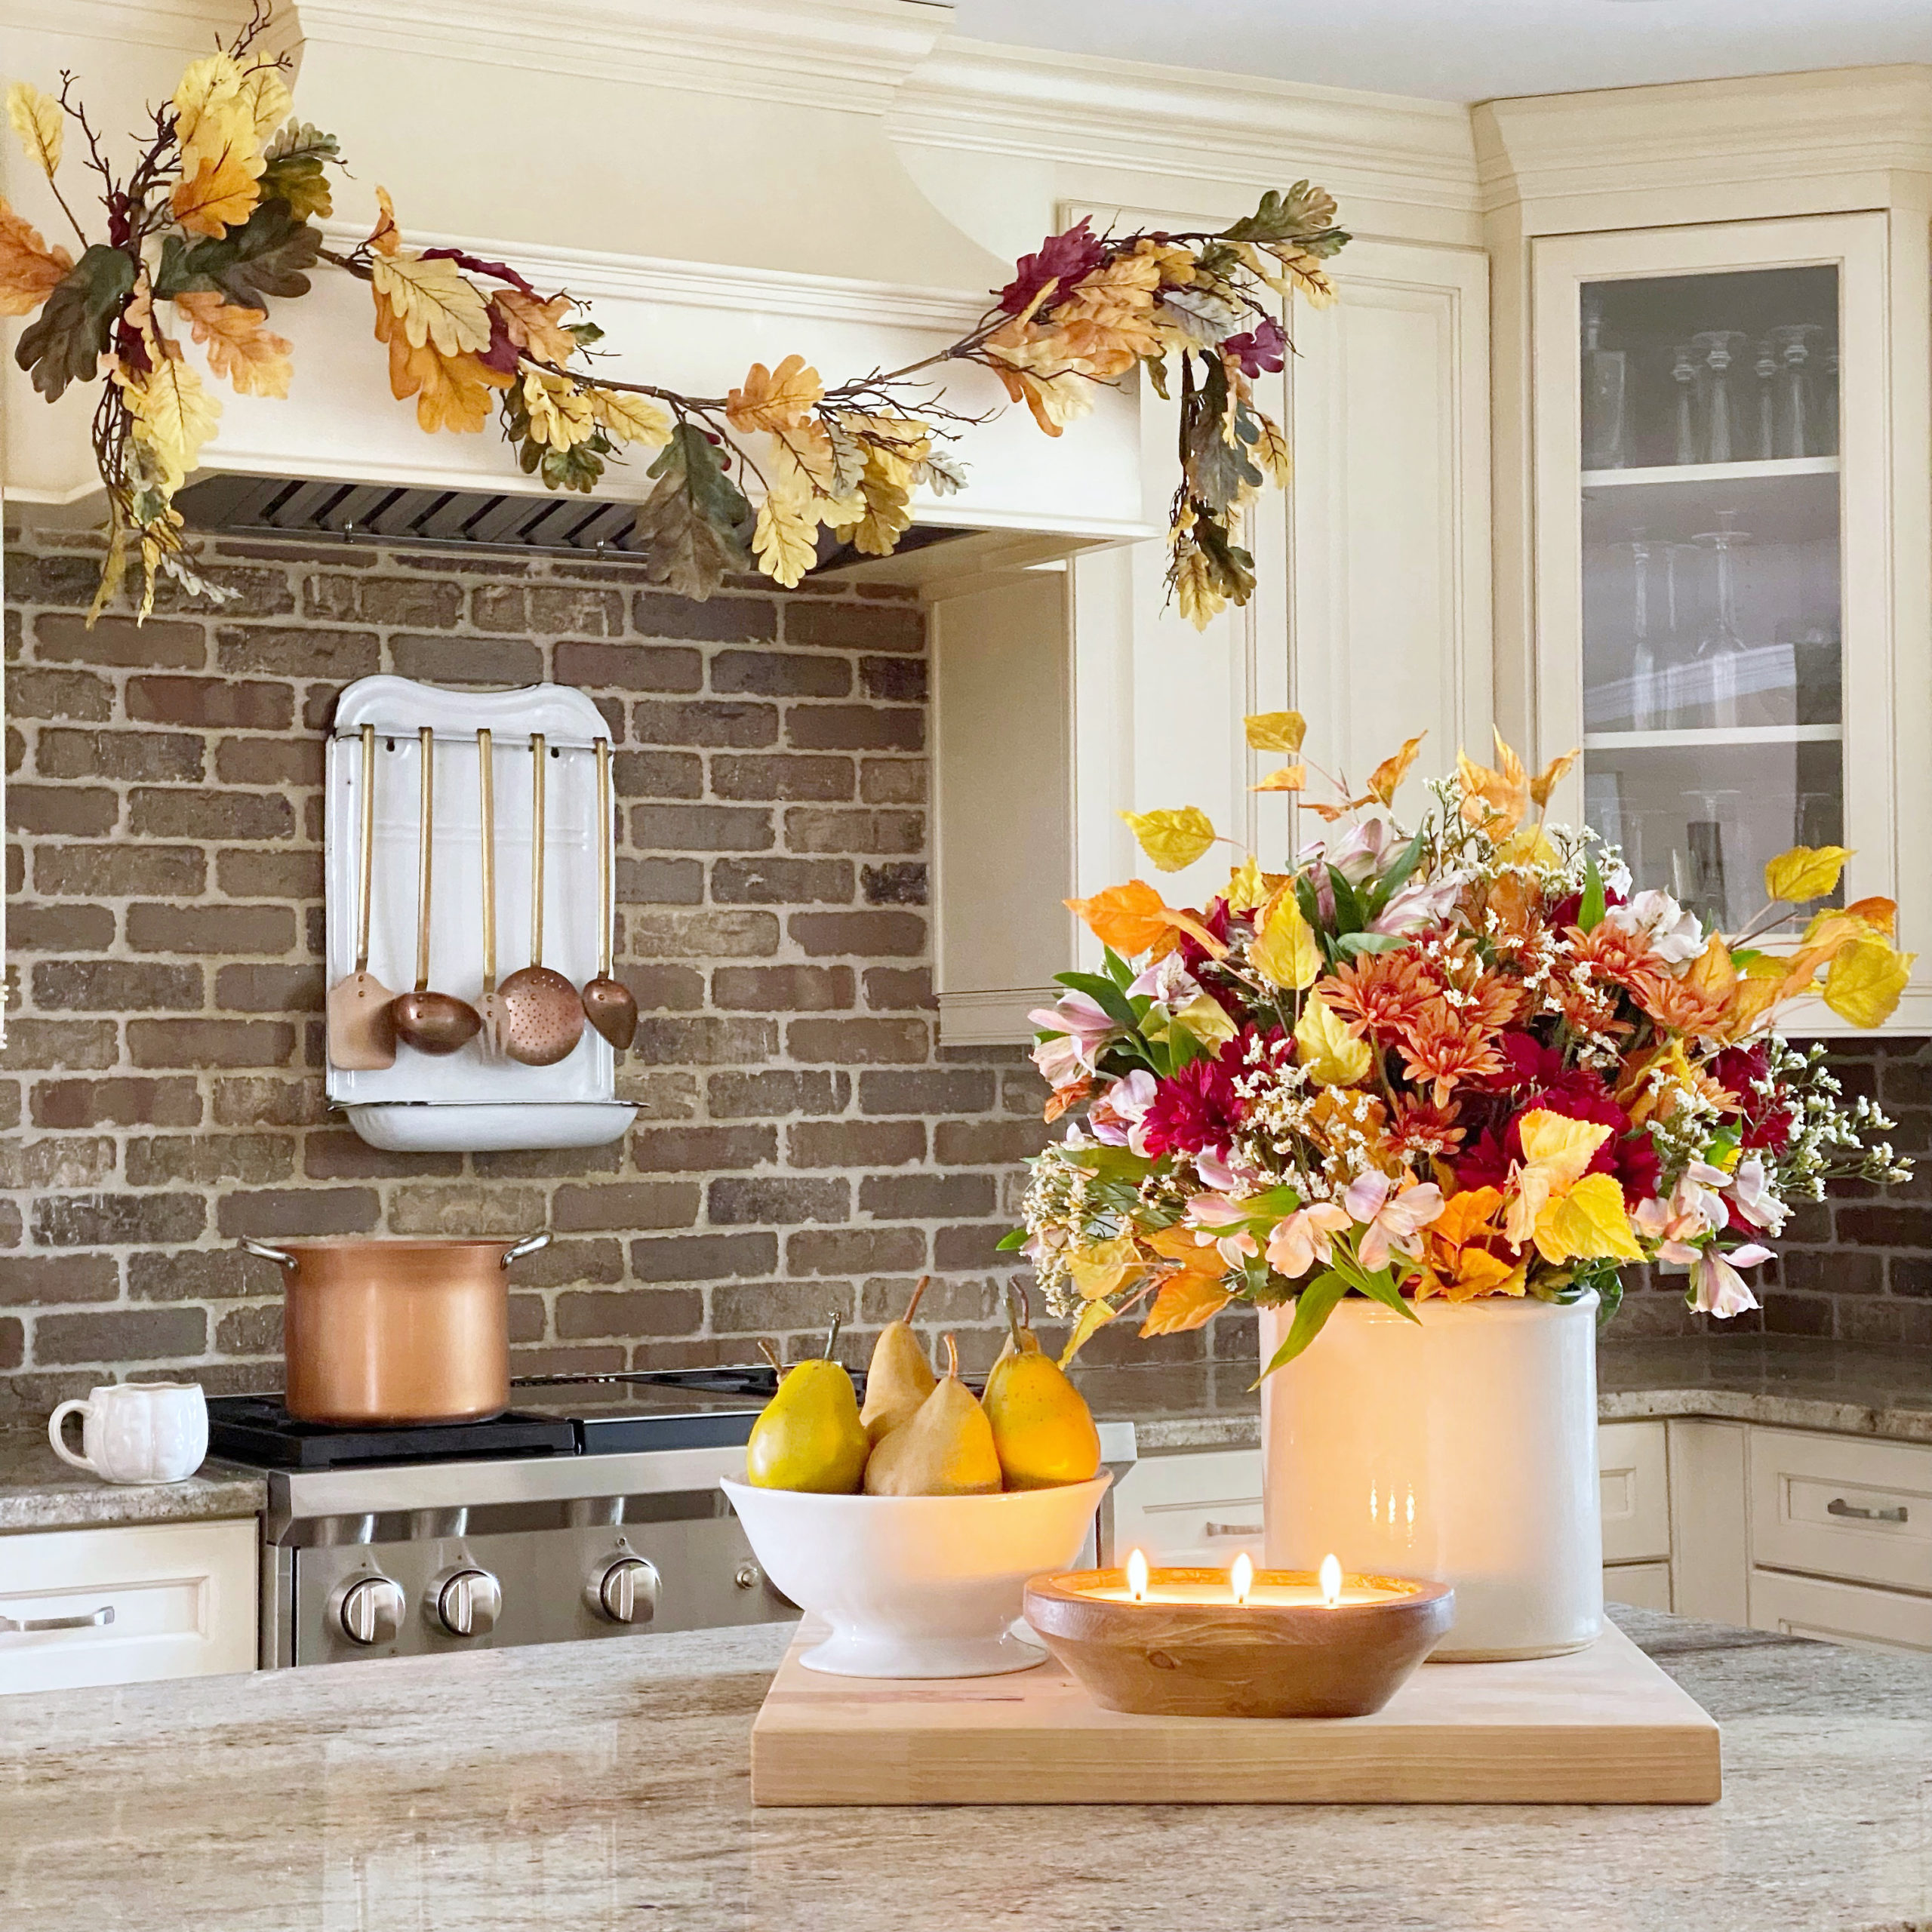 Kitchen island with a cutting board on it styled with a fall floral arrangement, a bowl of pears, and a candle. In the background is the range an on the hood is a vibrant fall colored garland.